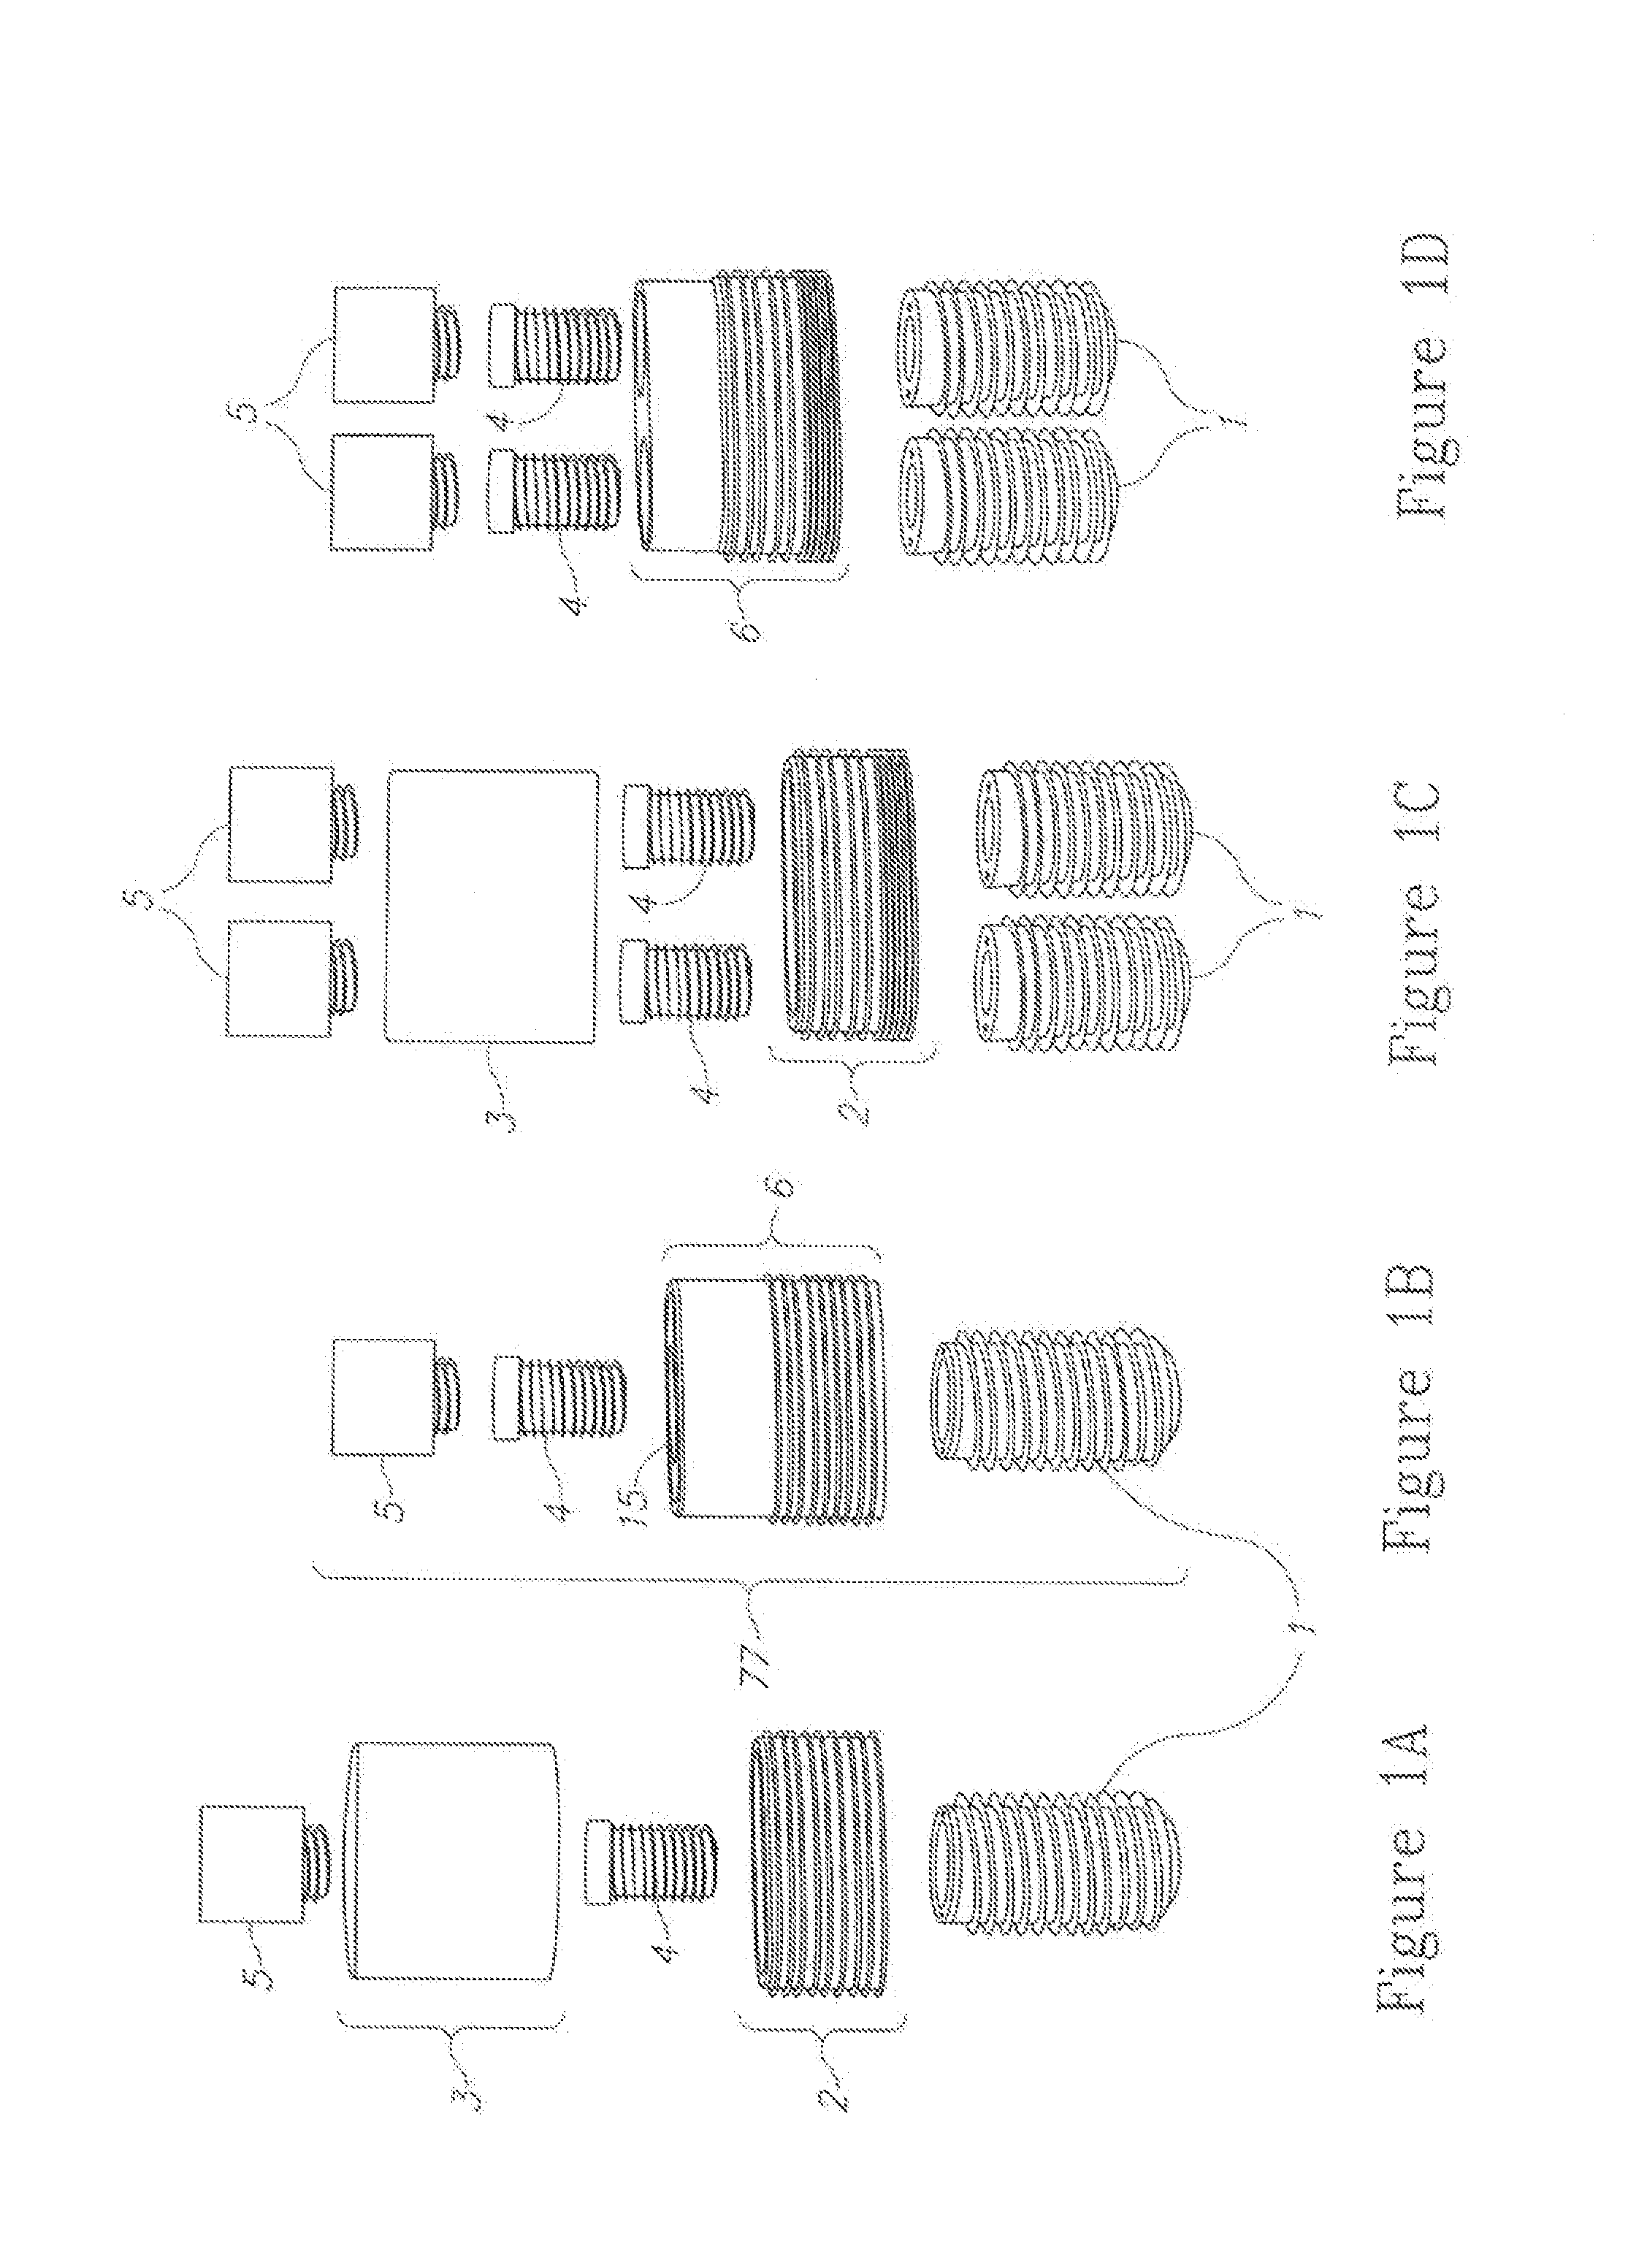 System, method and apparatus for implementing dental implants